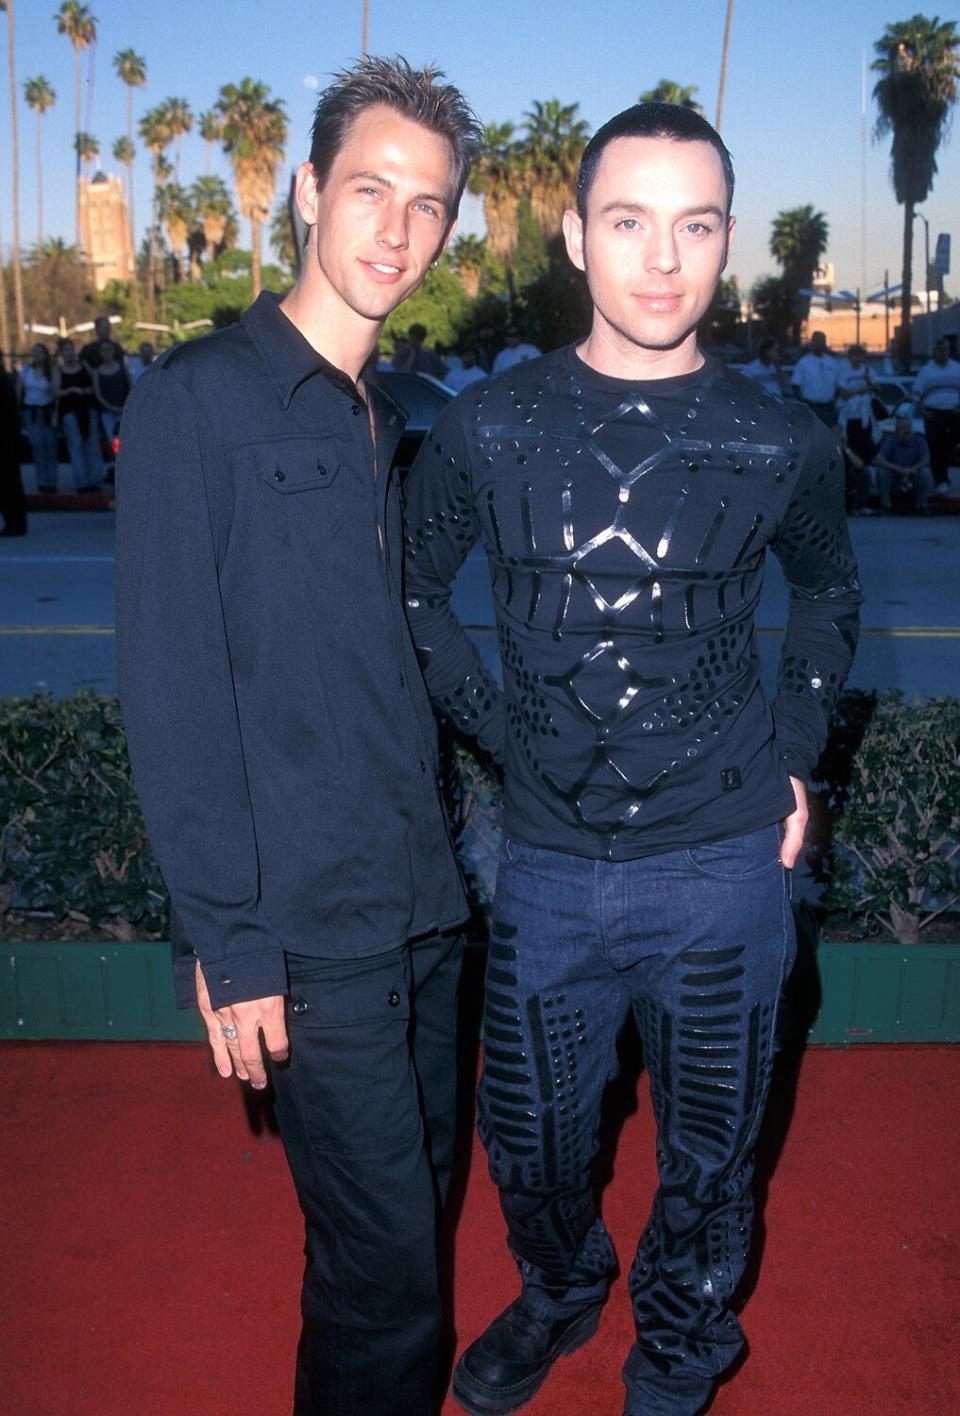 Pop/Rock group Savage Garden: musician Daniel Jones and singer Darren Hayes attend the Fourth Annual Blockbuster Entertainment Awards on March 10, 1998 at the Pantages Theatre in Hollywood, California.